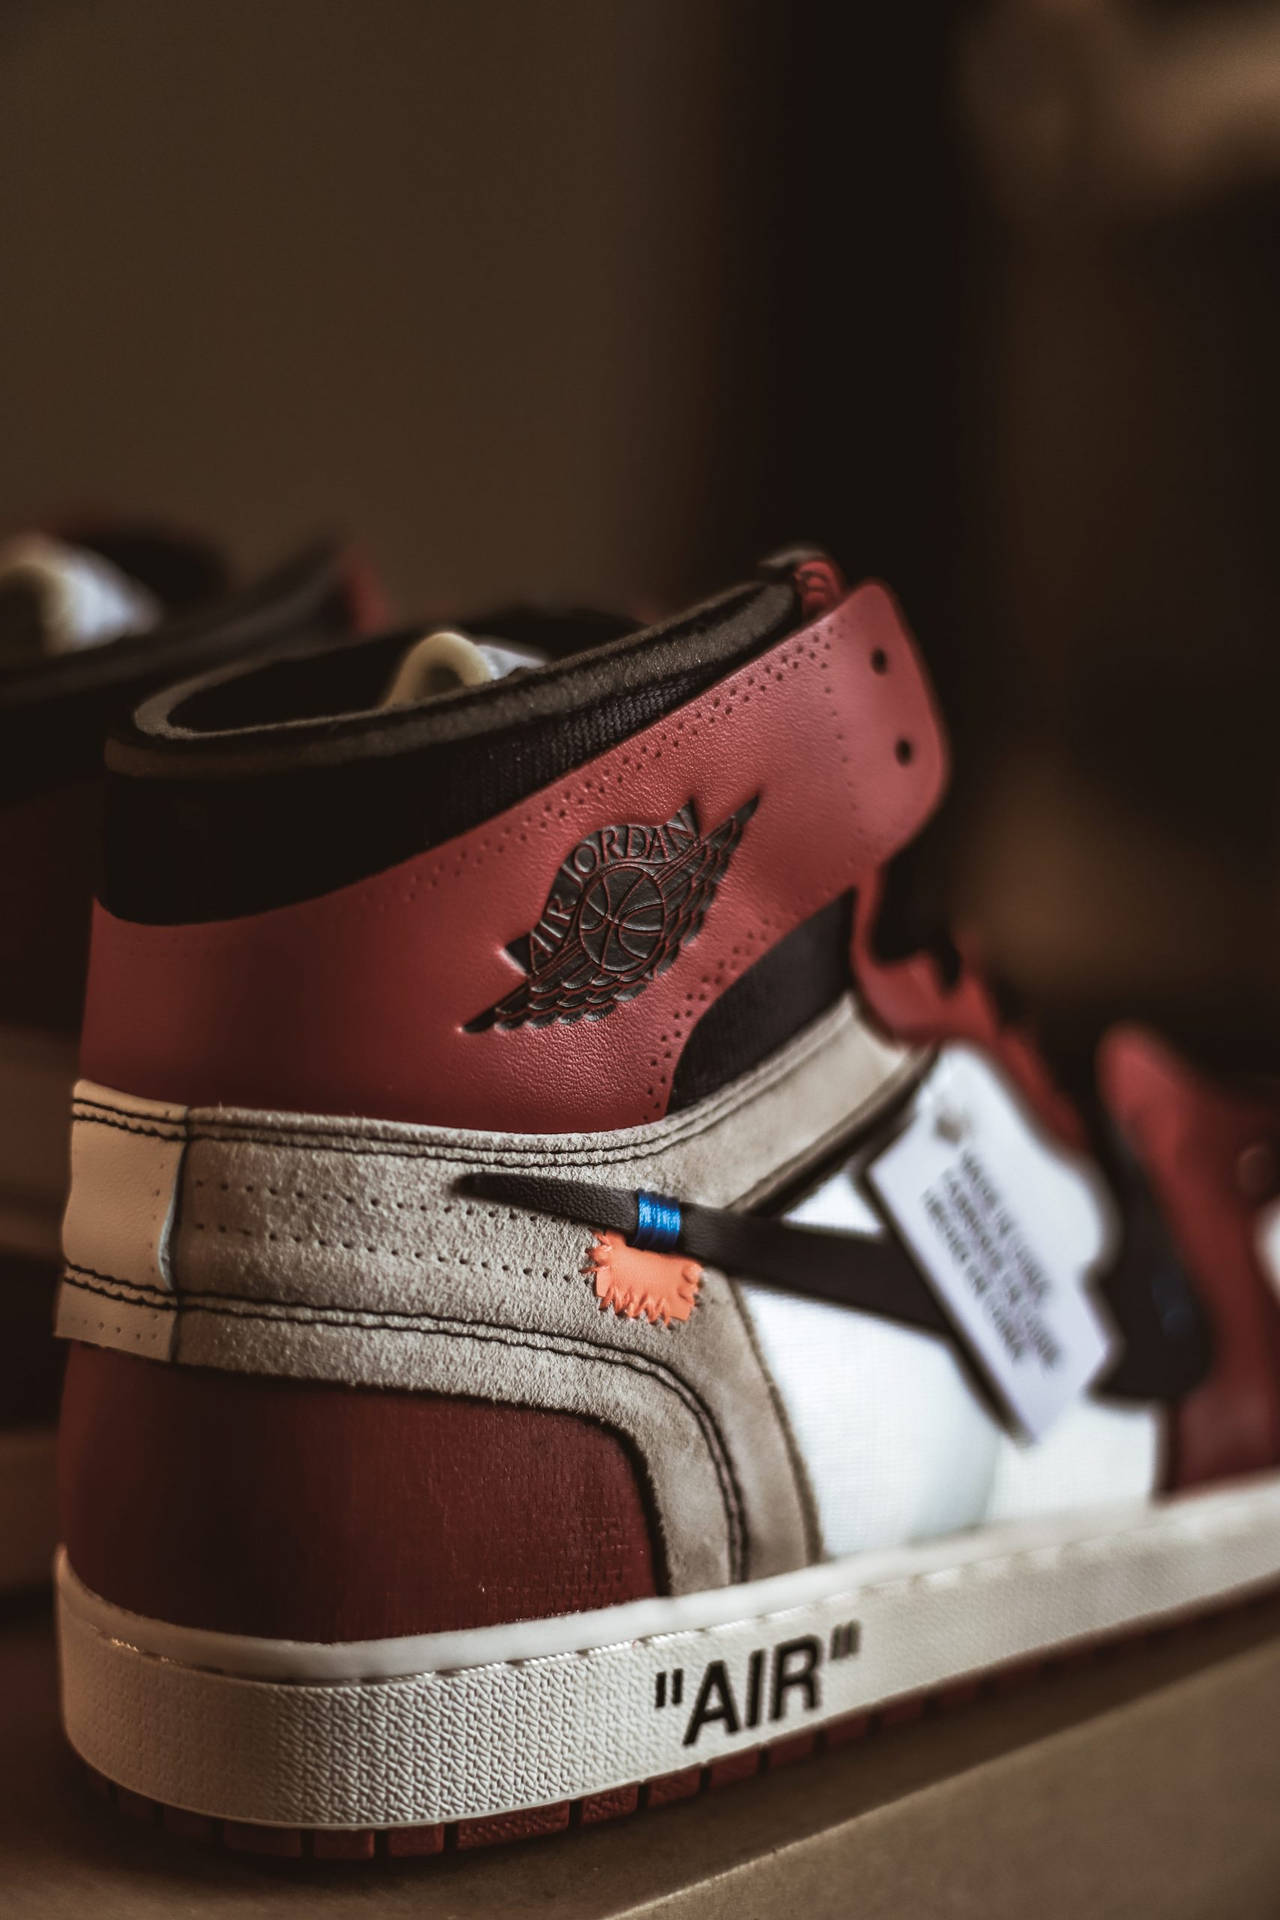 A Pair Of Air Jordan 1's With A Red And White Color Scheme Wallpaper